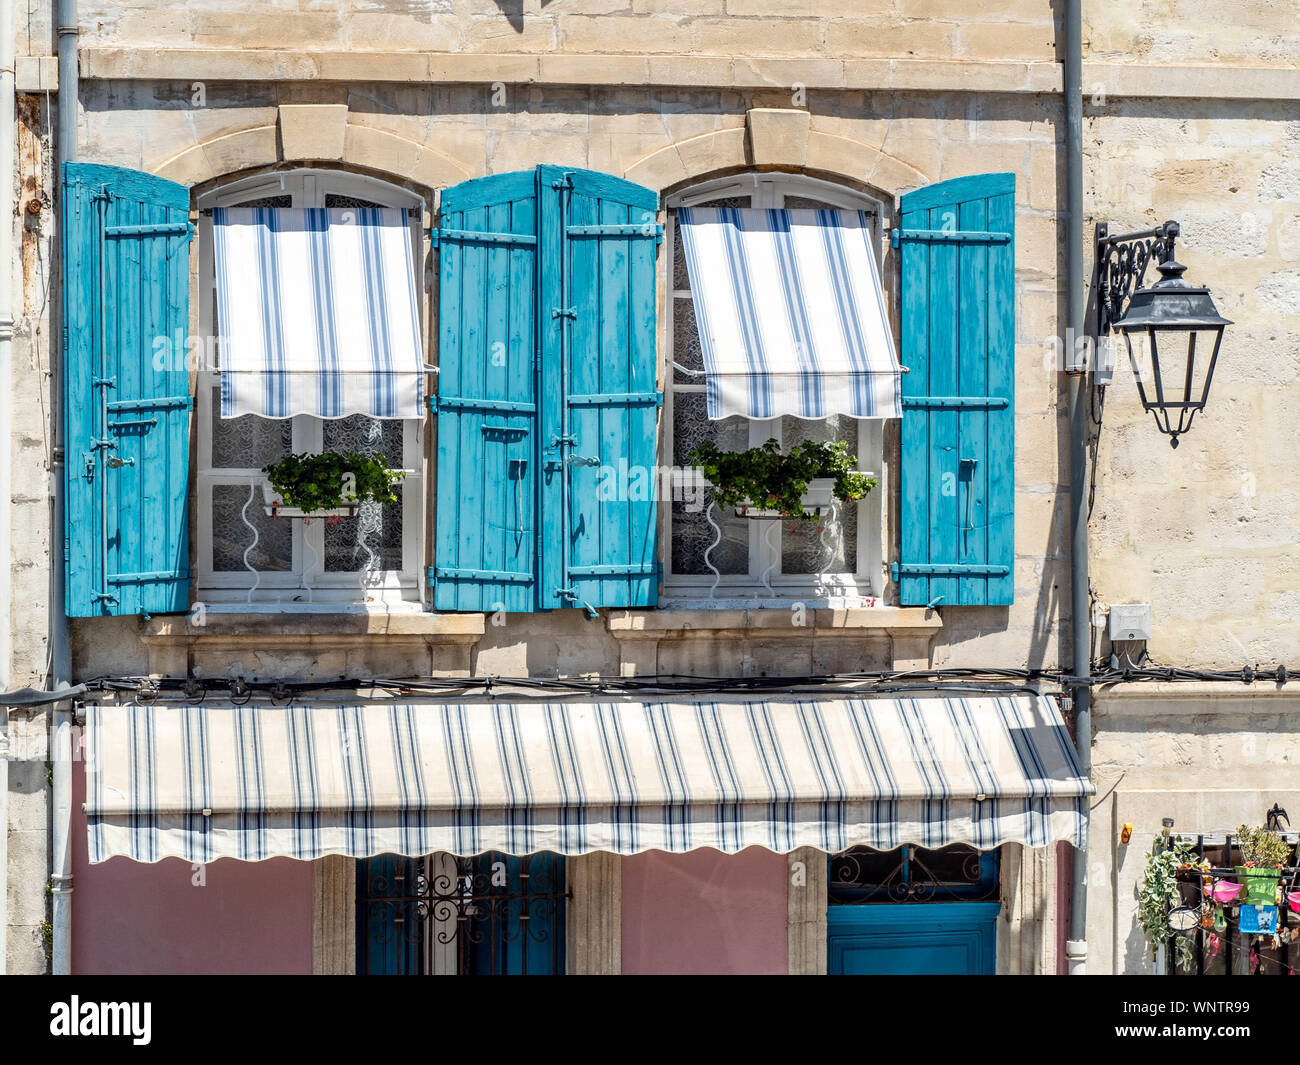 Windows framed by beautiful blue shutters and awnings. Stock Photo